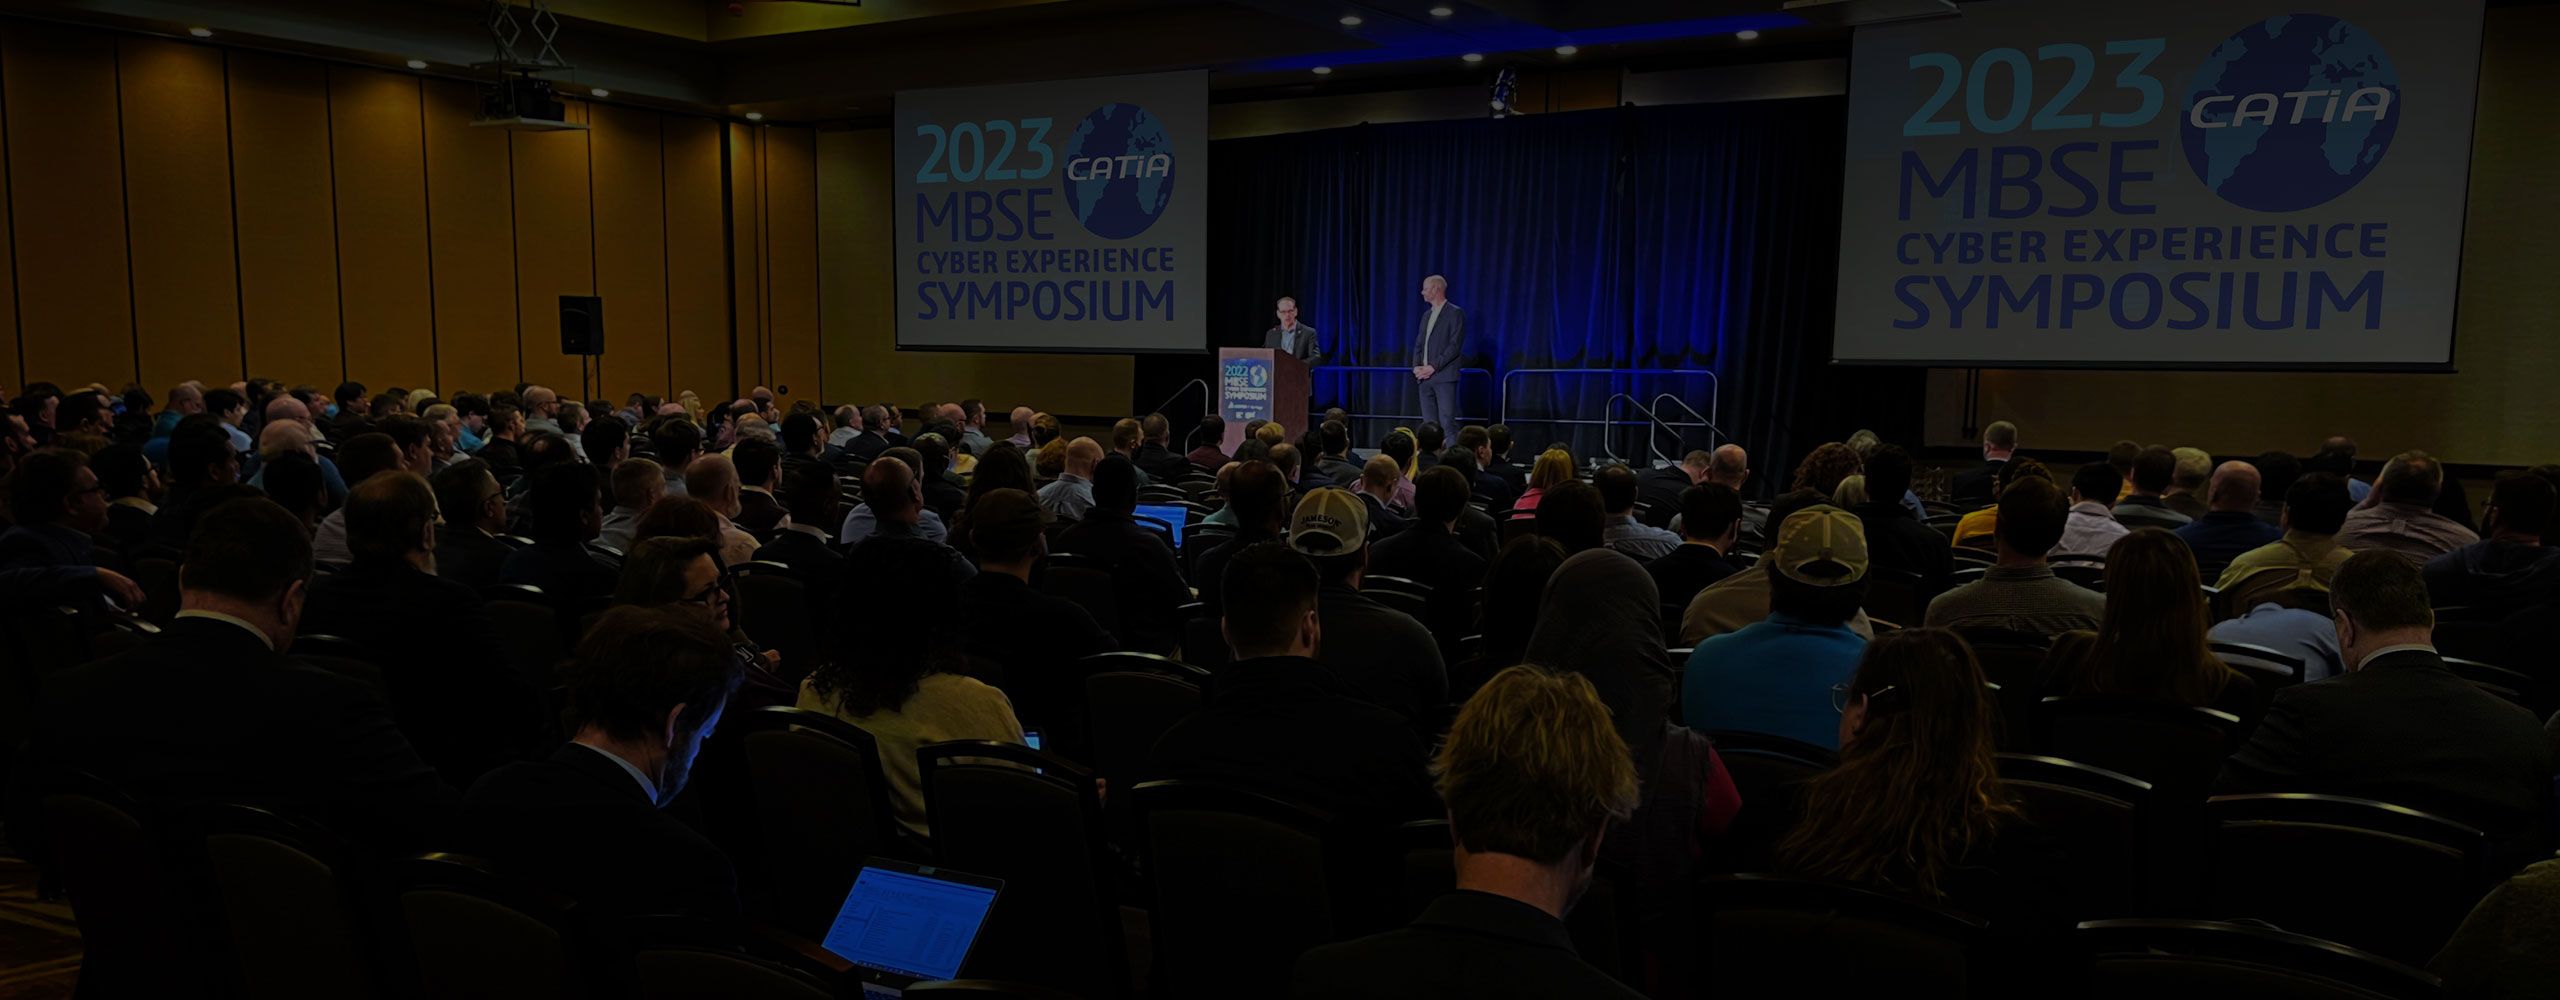 2023 MBSE Cyber Experience Symposium